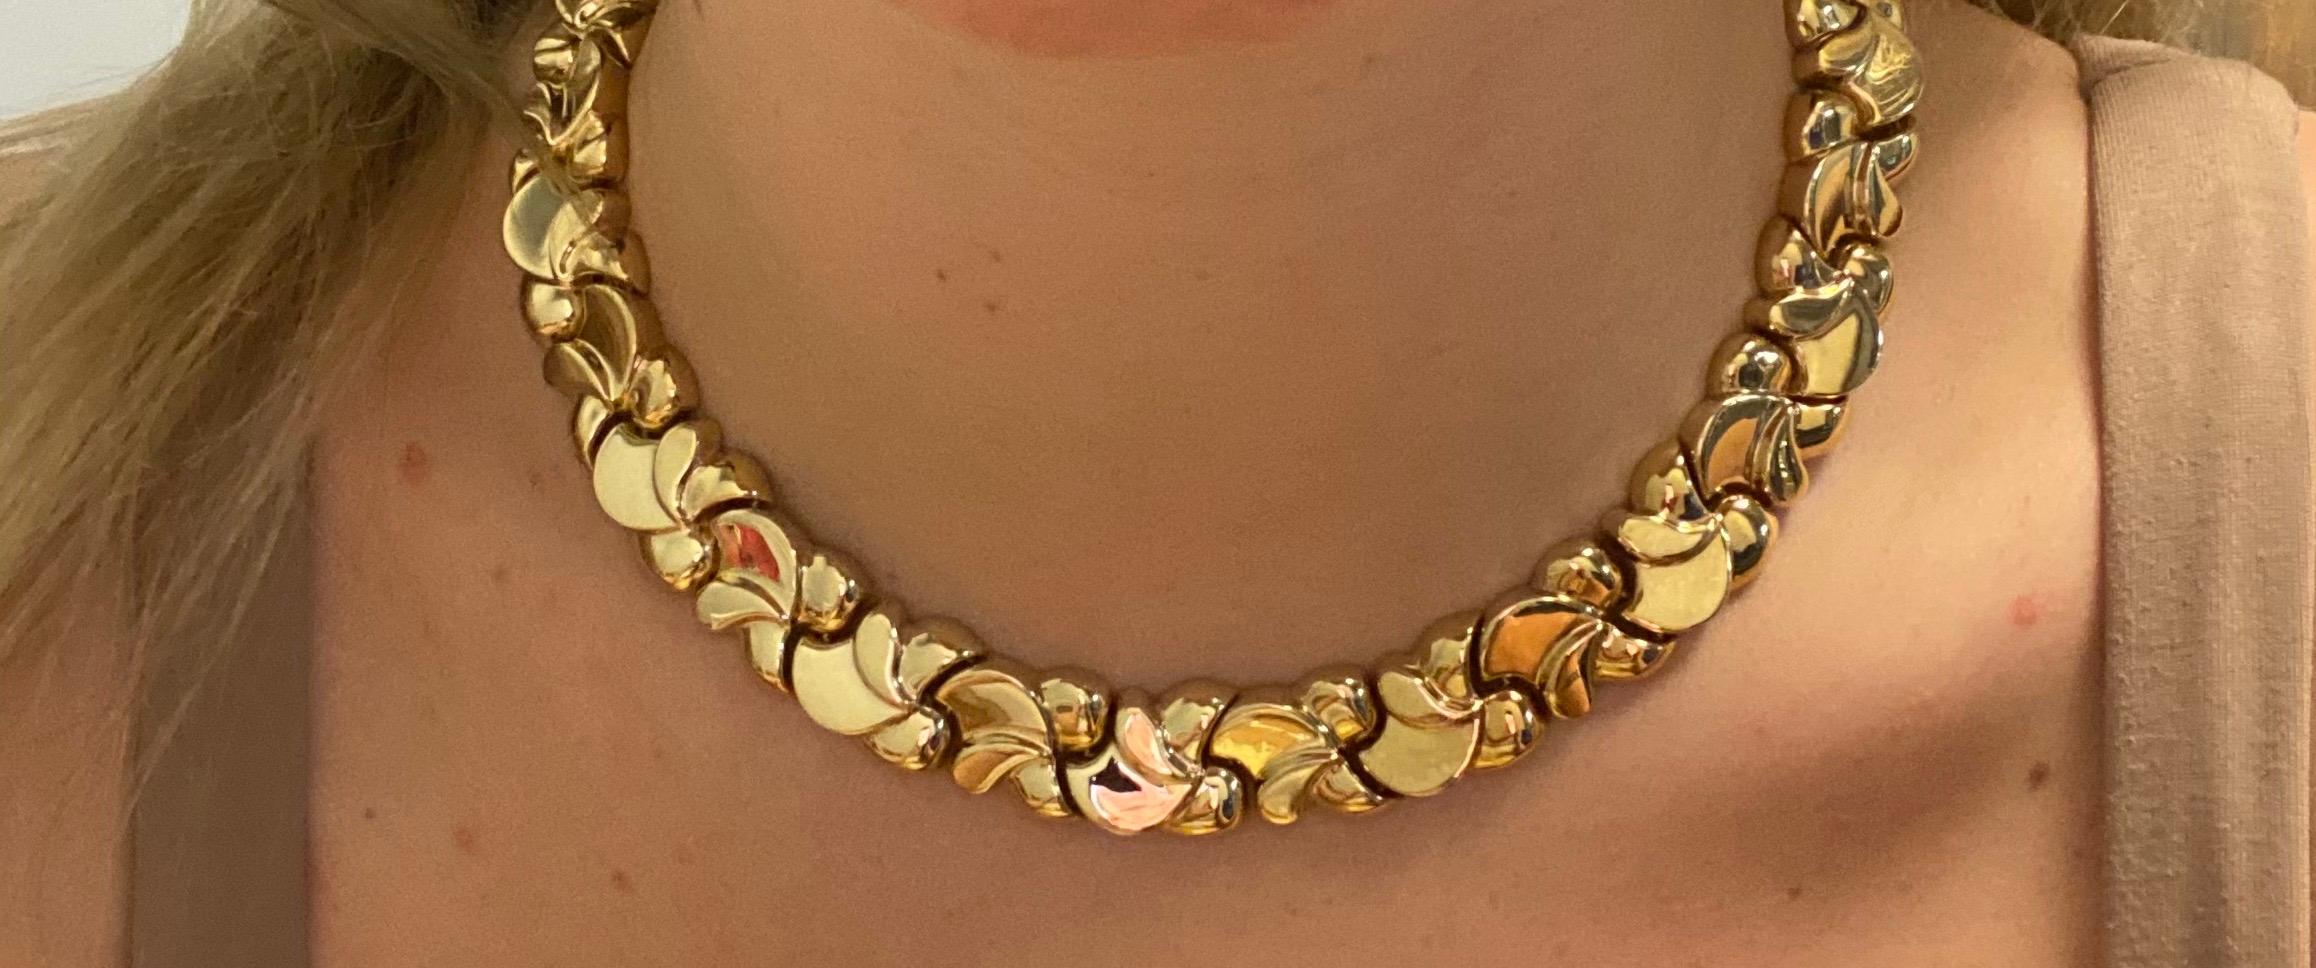 Vintage 2000's 14K Yellow Gold Italian Made Choker Necklace and Bracelet Set - The necklace is 16 inches long and the bracelet is 7.25 inches long. The width of the links is .50 inches. The both feature a hidden plunger clasp with saftey latches.